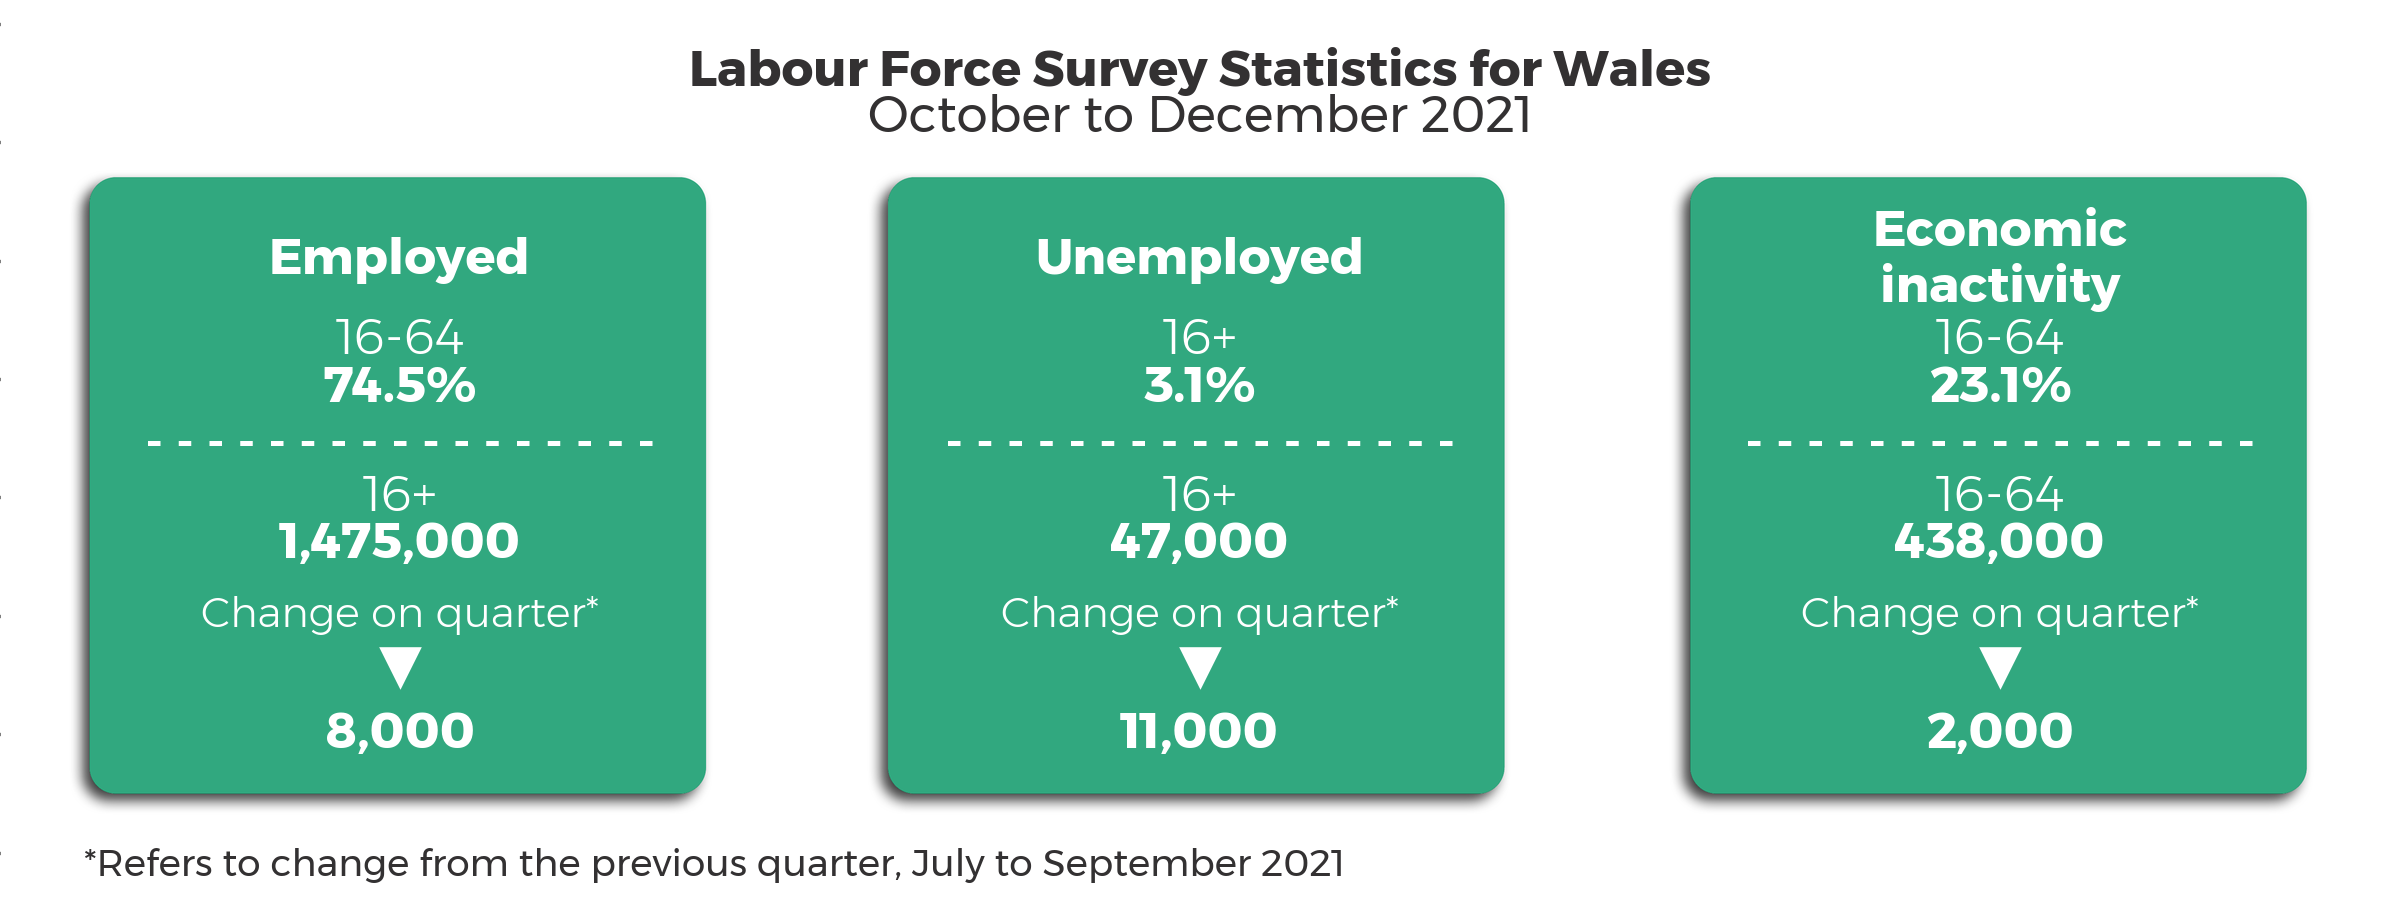 Headline statistics October 2021 to December 2021 compared to the previous quarter July 2021 to September 2021. The 16+ unemployment rate is 3.1% with 47,000 people unemployed, a decrease of 11,000 from the previous quarter. The 16-64 employment rate is 74.5%. 1,475,000 people aged 16+ employed, a decrease of 8,000 from the previous quarter. The 16-64 economic inactivity rate is 23.1% with 438,000 people economically inactive, a decrease of 2,000 on the previous quarter.